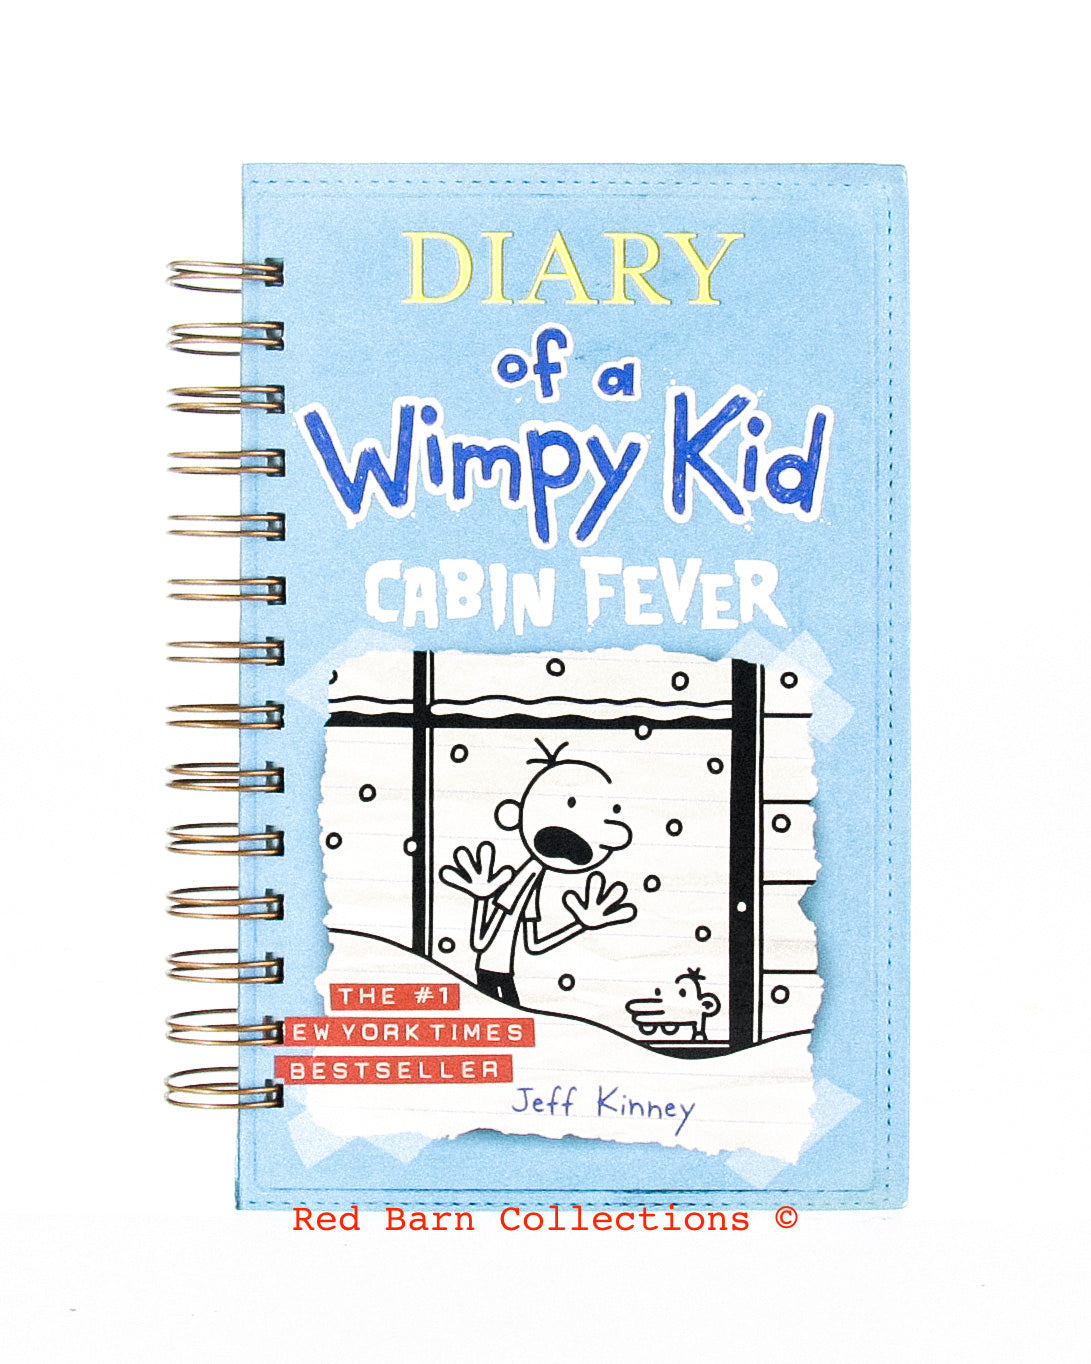 Diary of a Wimpy Kid: Cabin Fever-Red Barn Collections